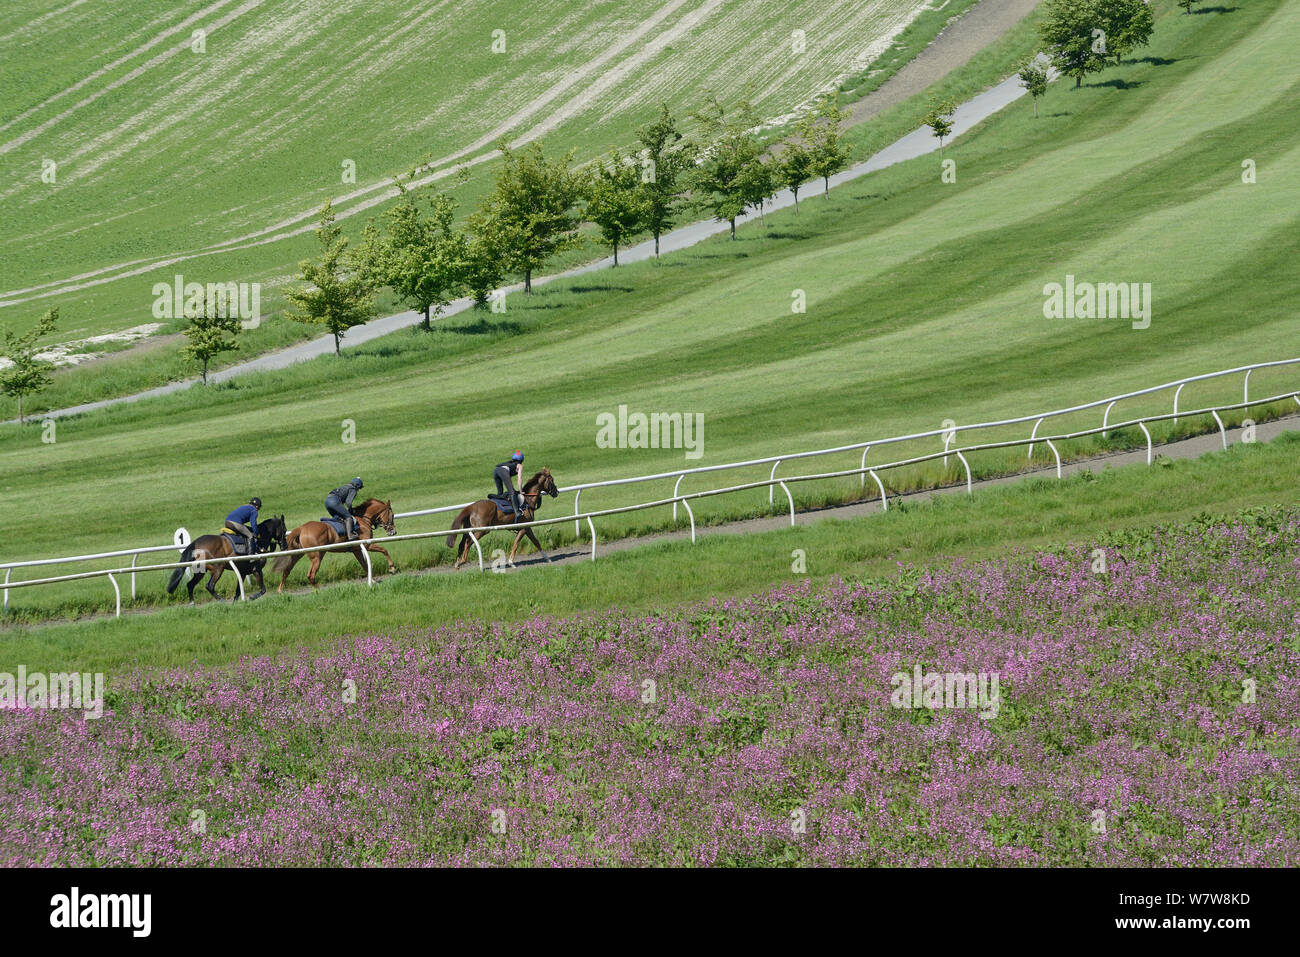 Racehorses in training, racing up hillside gallops with pollen and nectar flower patch of Red campion (Silene dioica) in the foreground, Marlborough Downs, Wiltshire, UK, June. Stock Photo